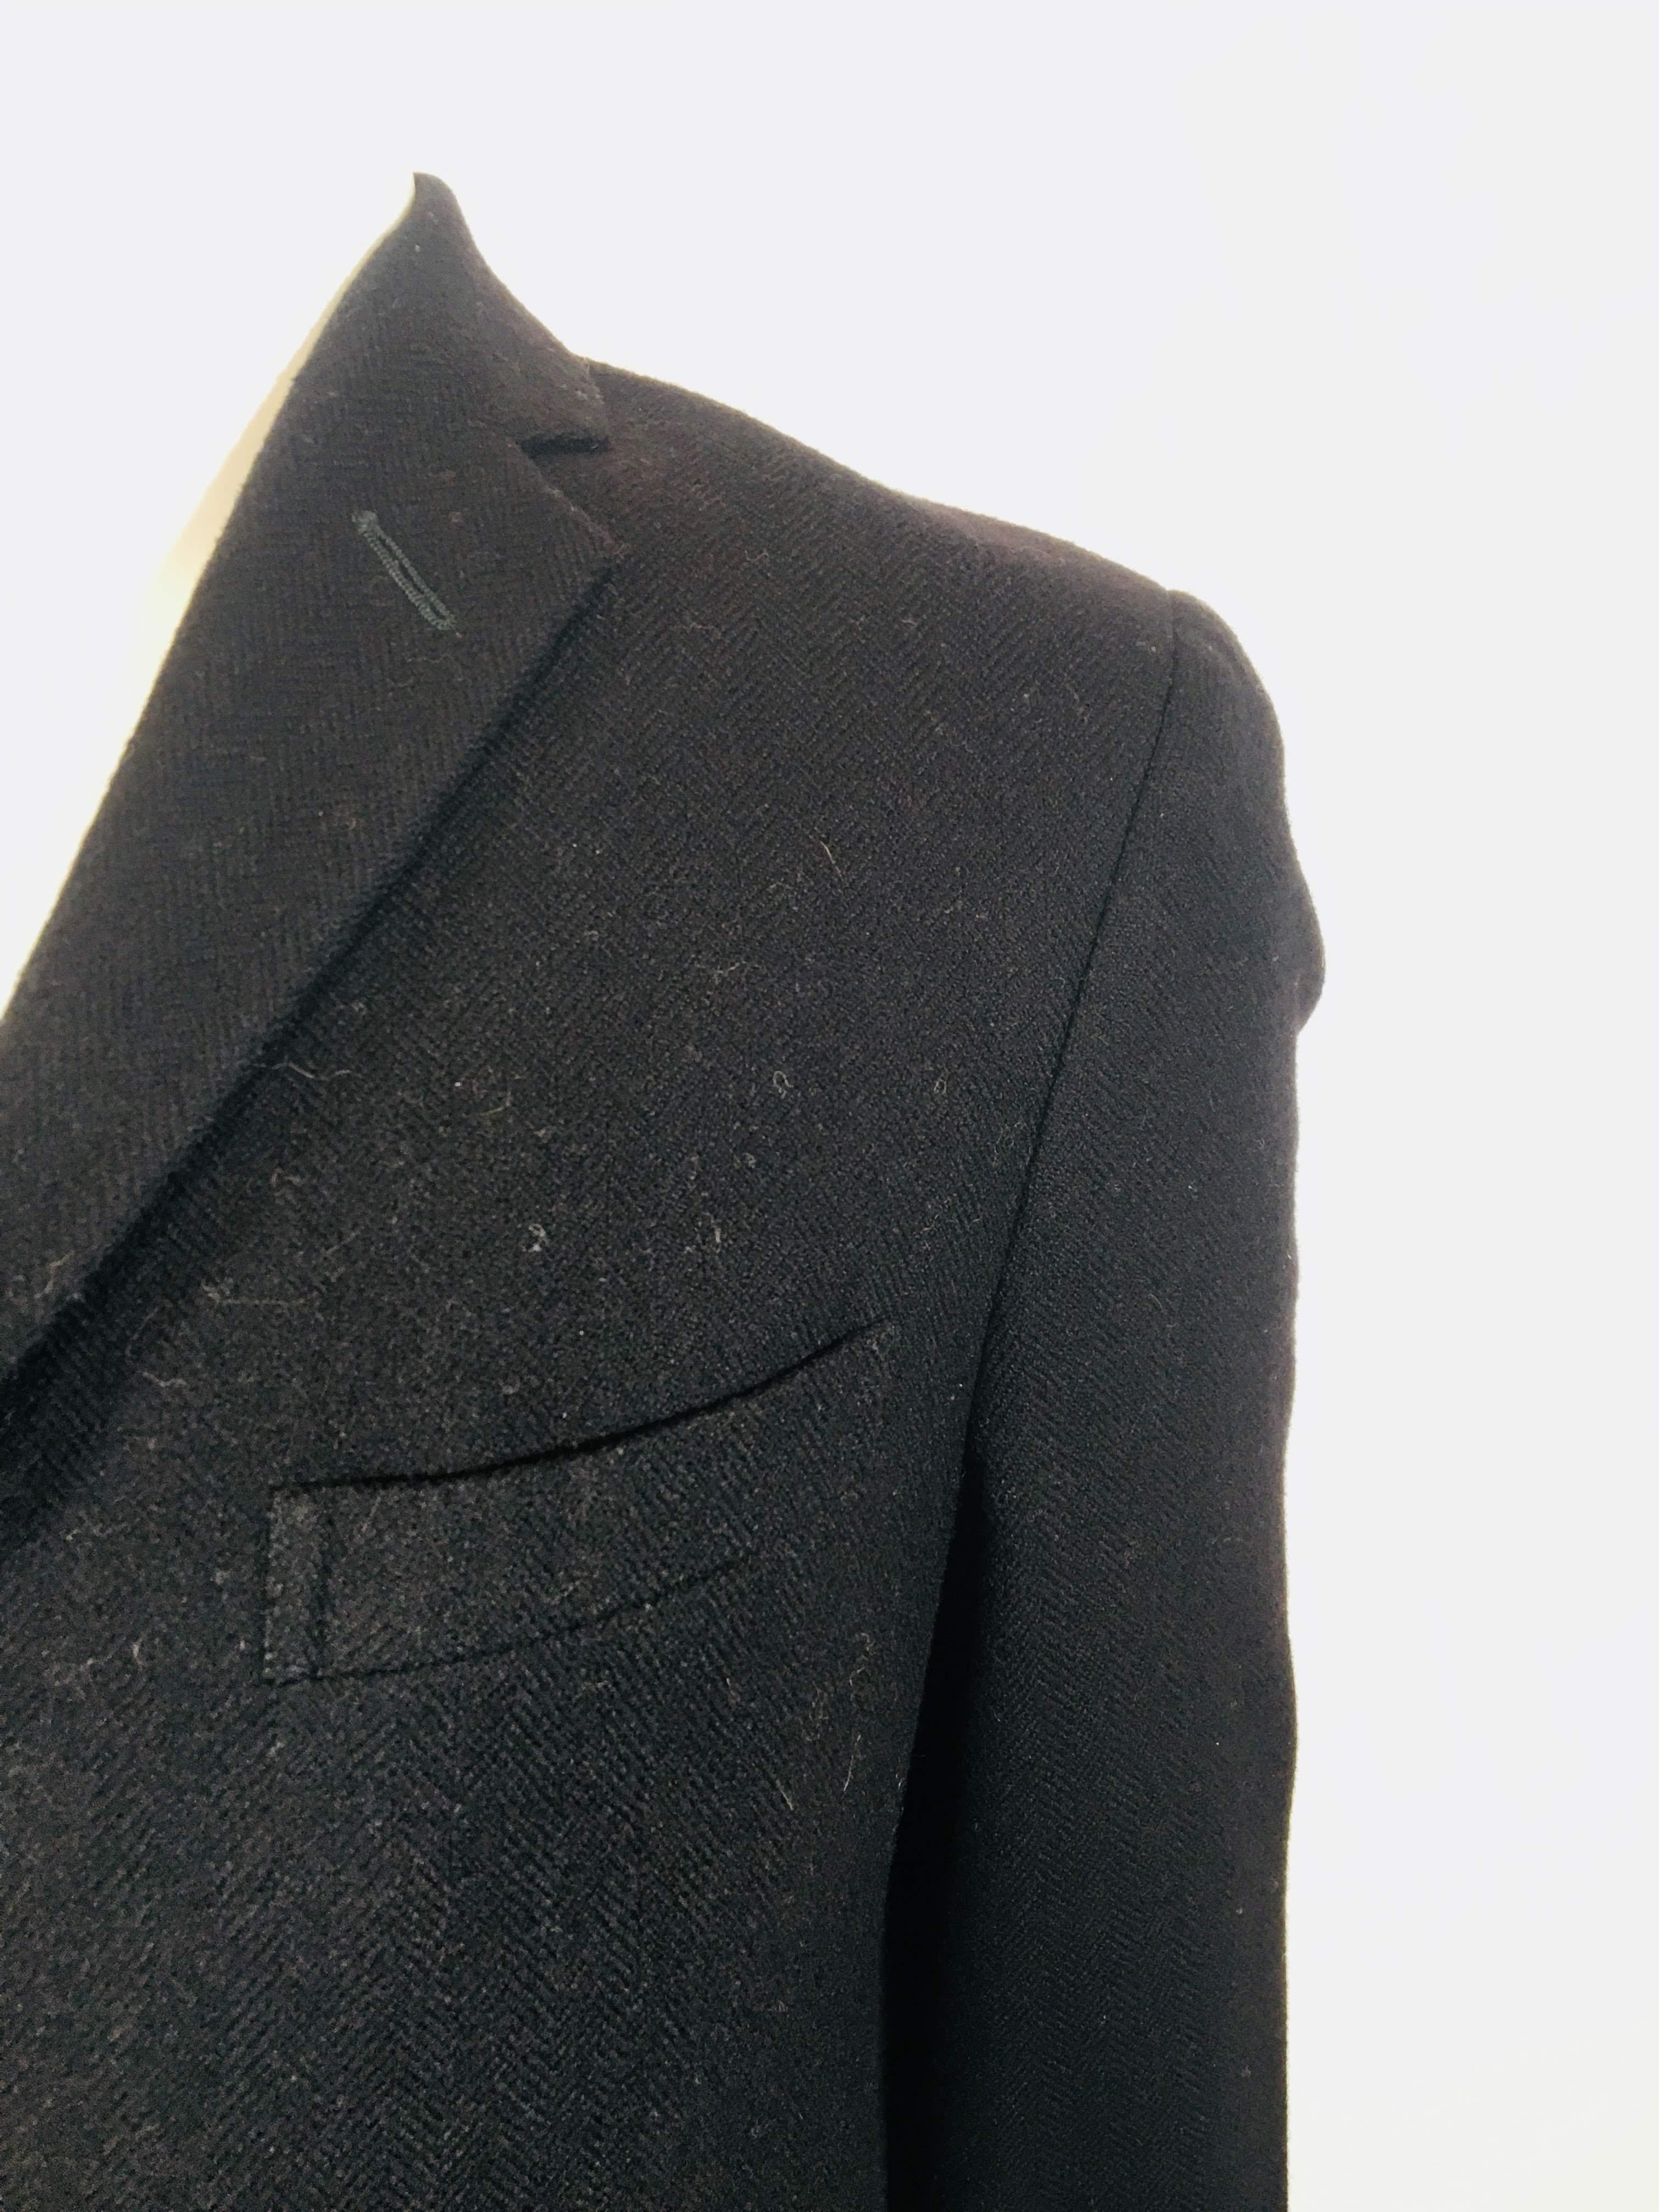 Men's Polo by Ralph Lauren Blazer in Black. Wool/Cashmere Blend with 3 Button Closure. Two Pockets.